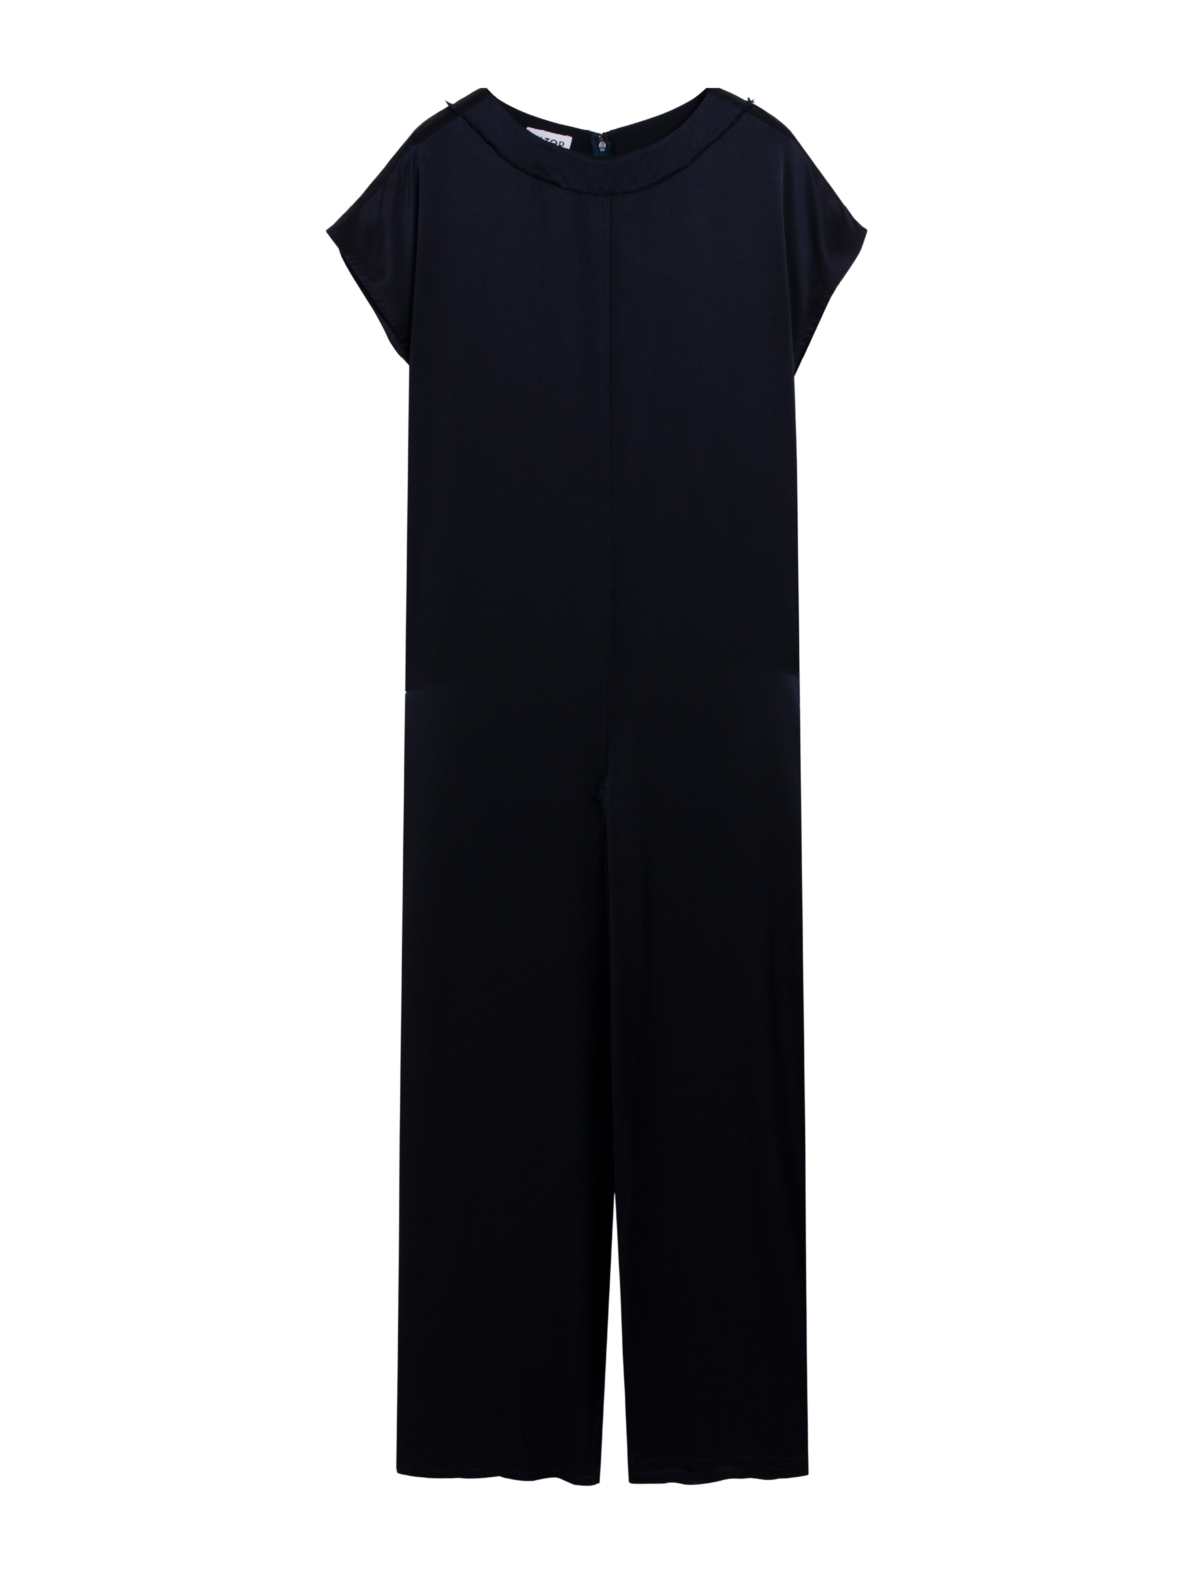 Alter Designs Sleeveless Jumpsuit in Navy Satin.png